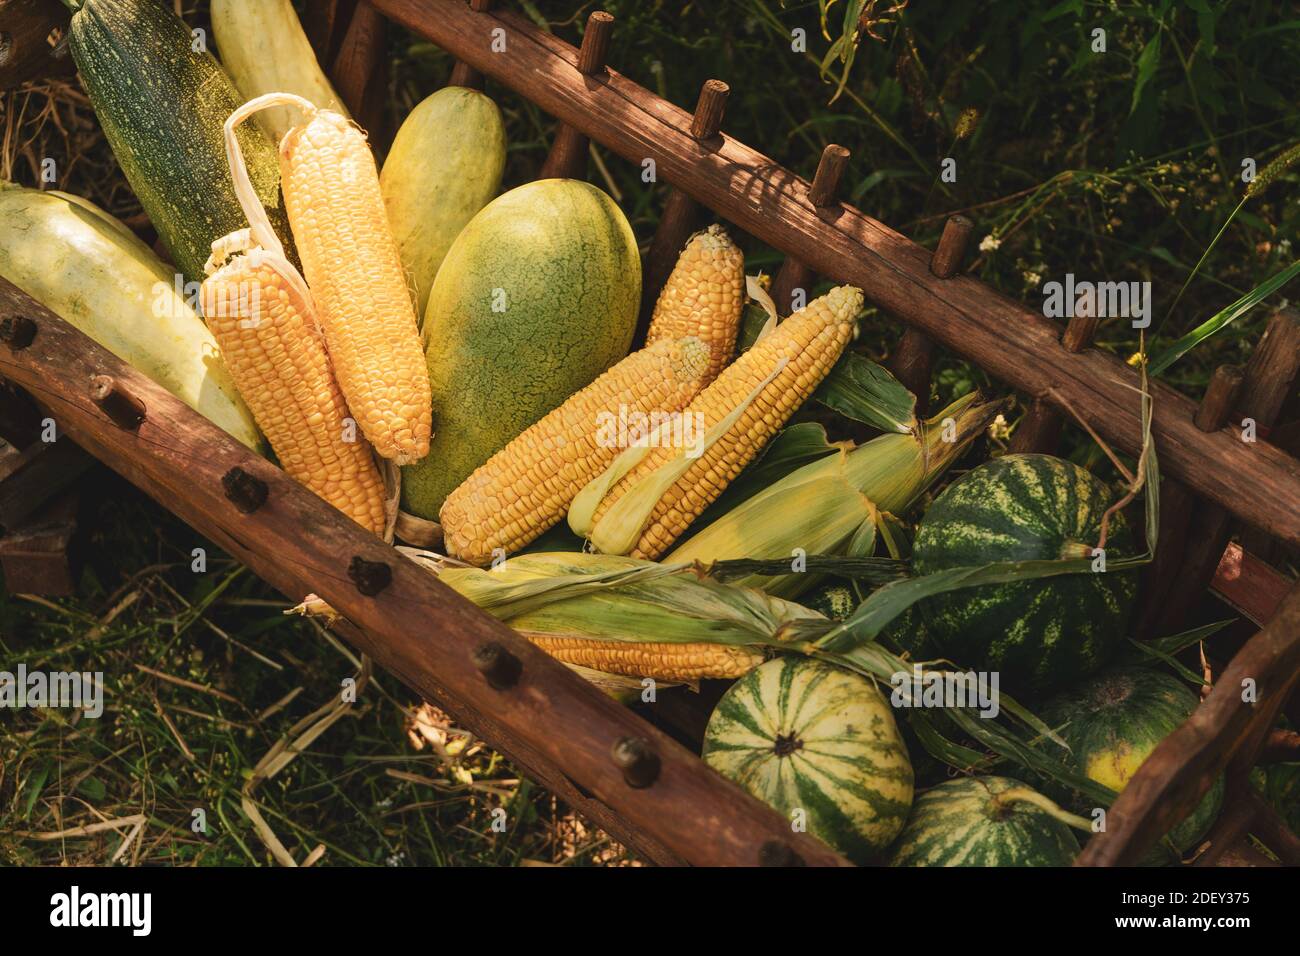 Harvest festival with a wooden manger with gifts from the fields of corn, watermelon, zucchini standing decoration in the garden near the house Stock Photo